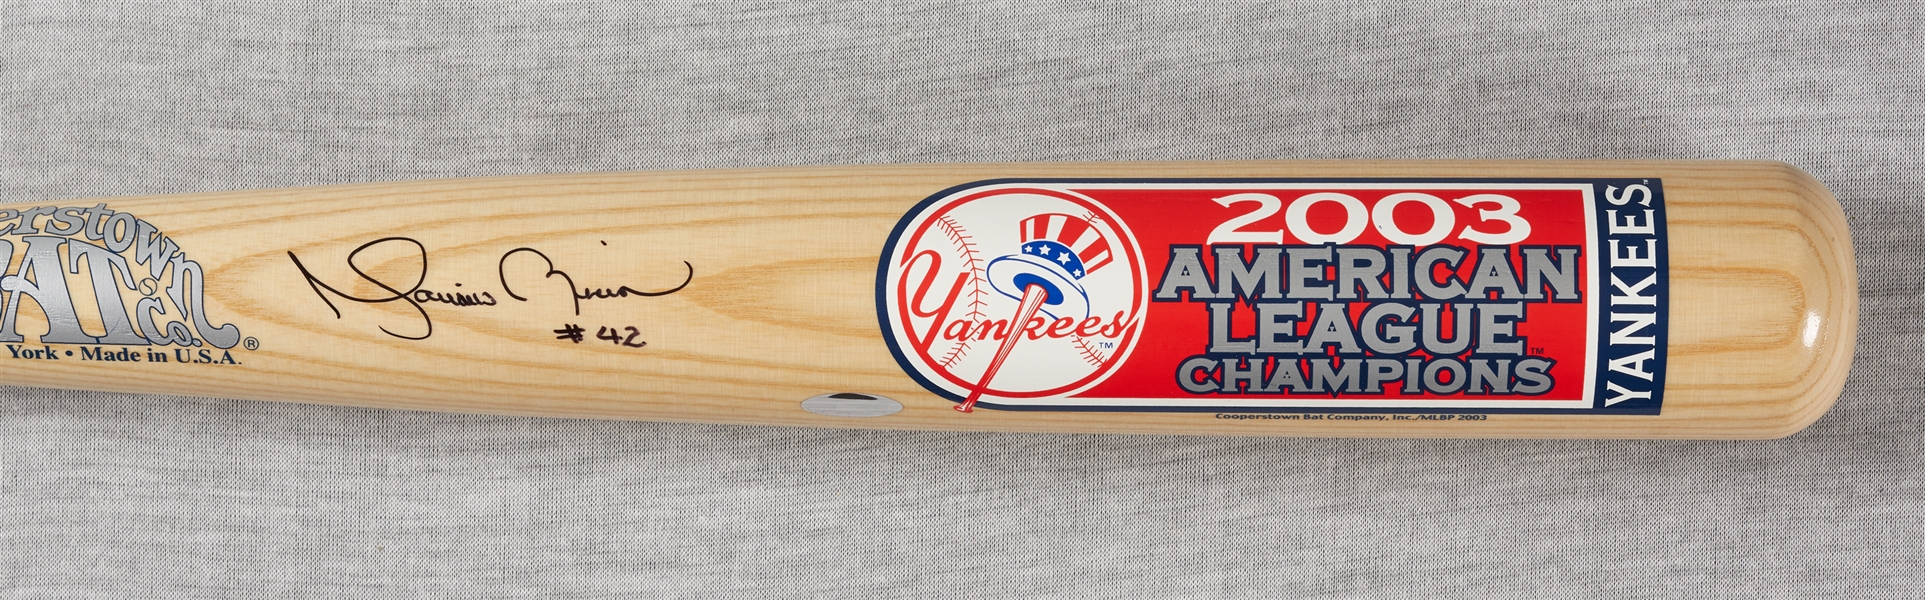 Mariano Rivera Signed Cooperstown 2003 A.L. Champions Logo Bat (Serial Number 42) (Steiner)